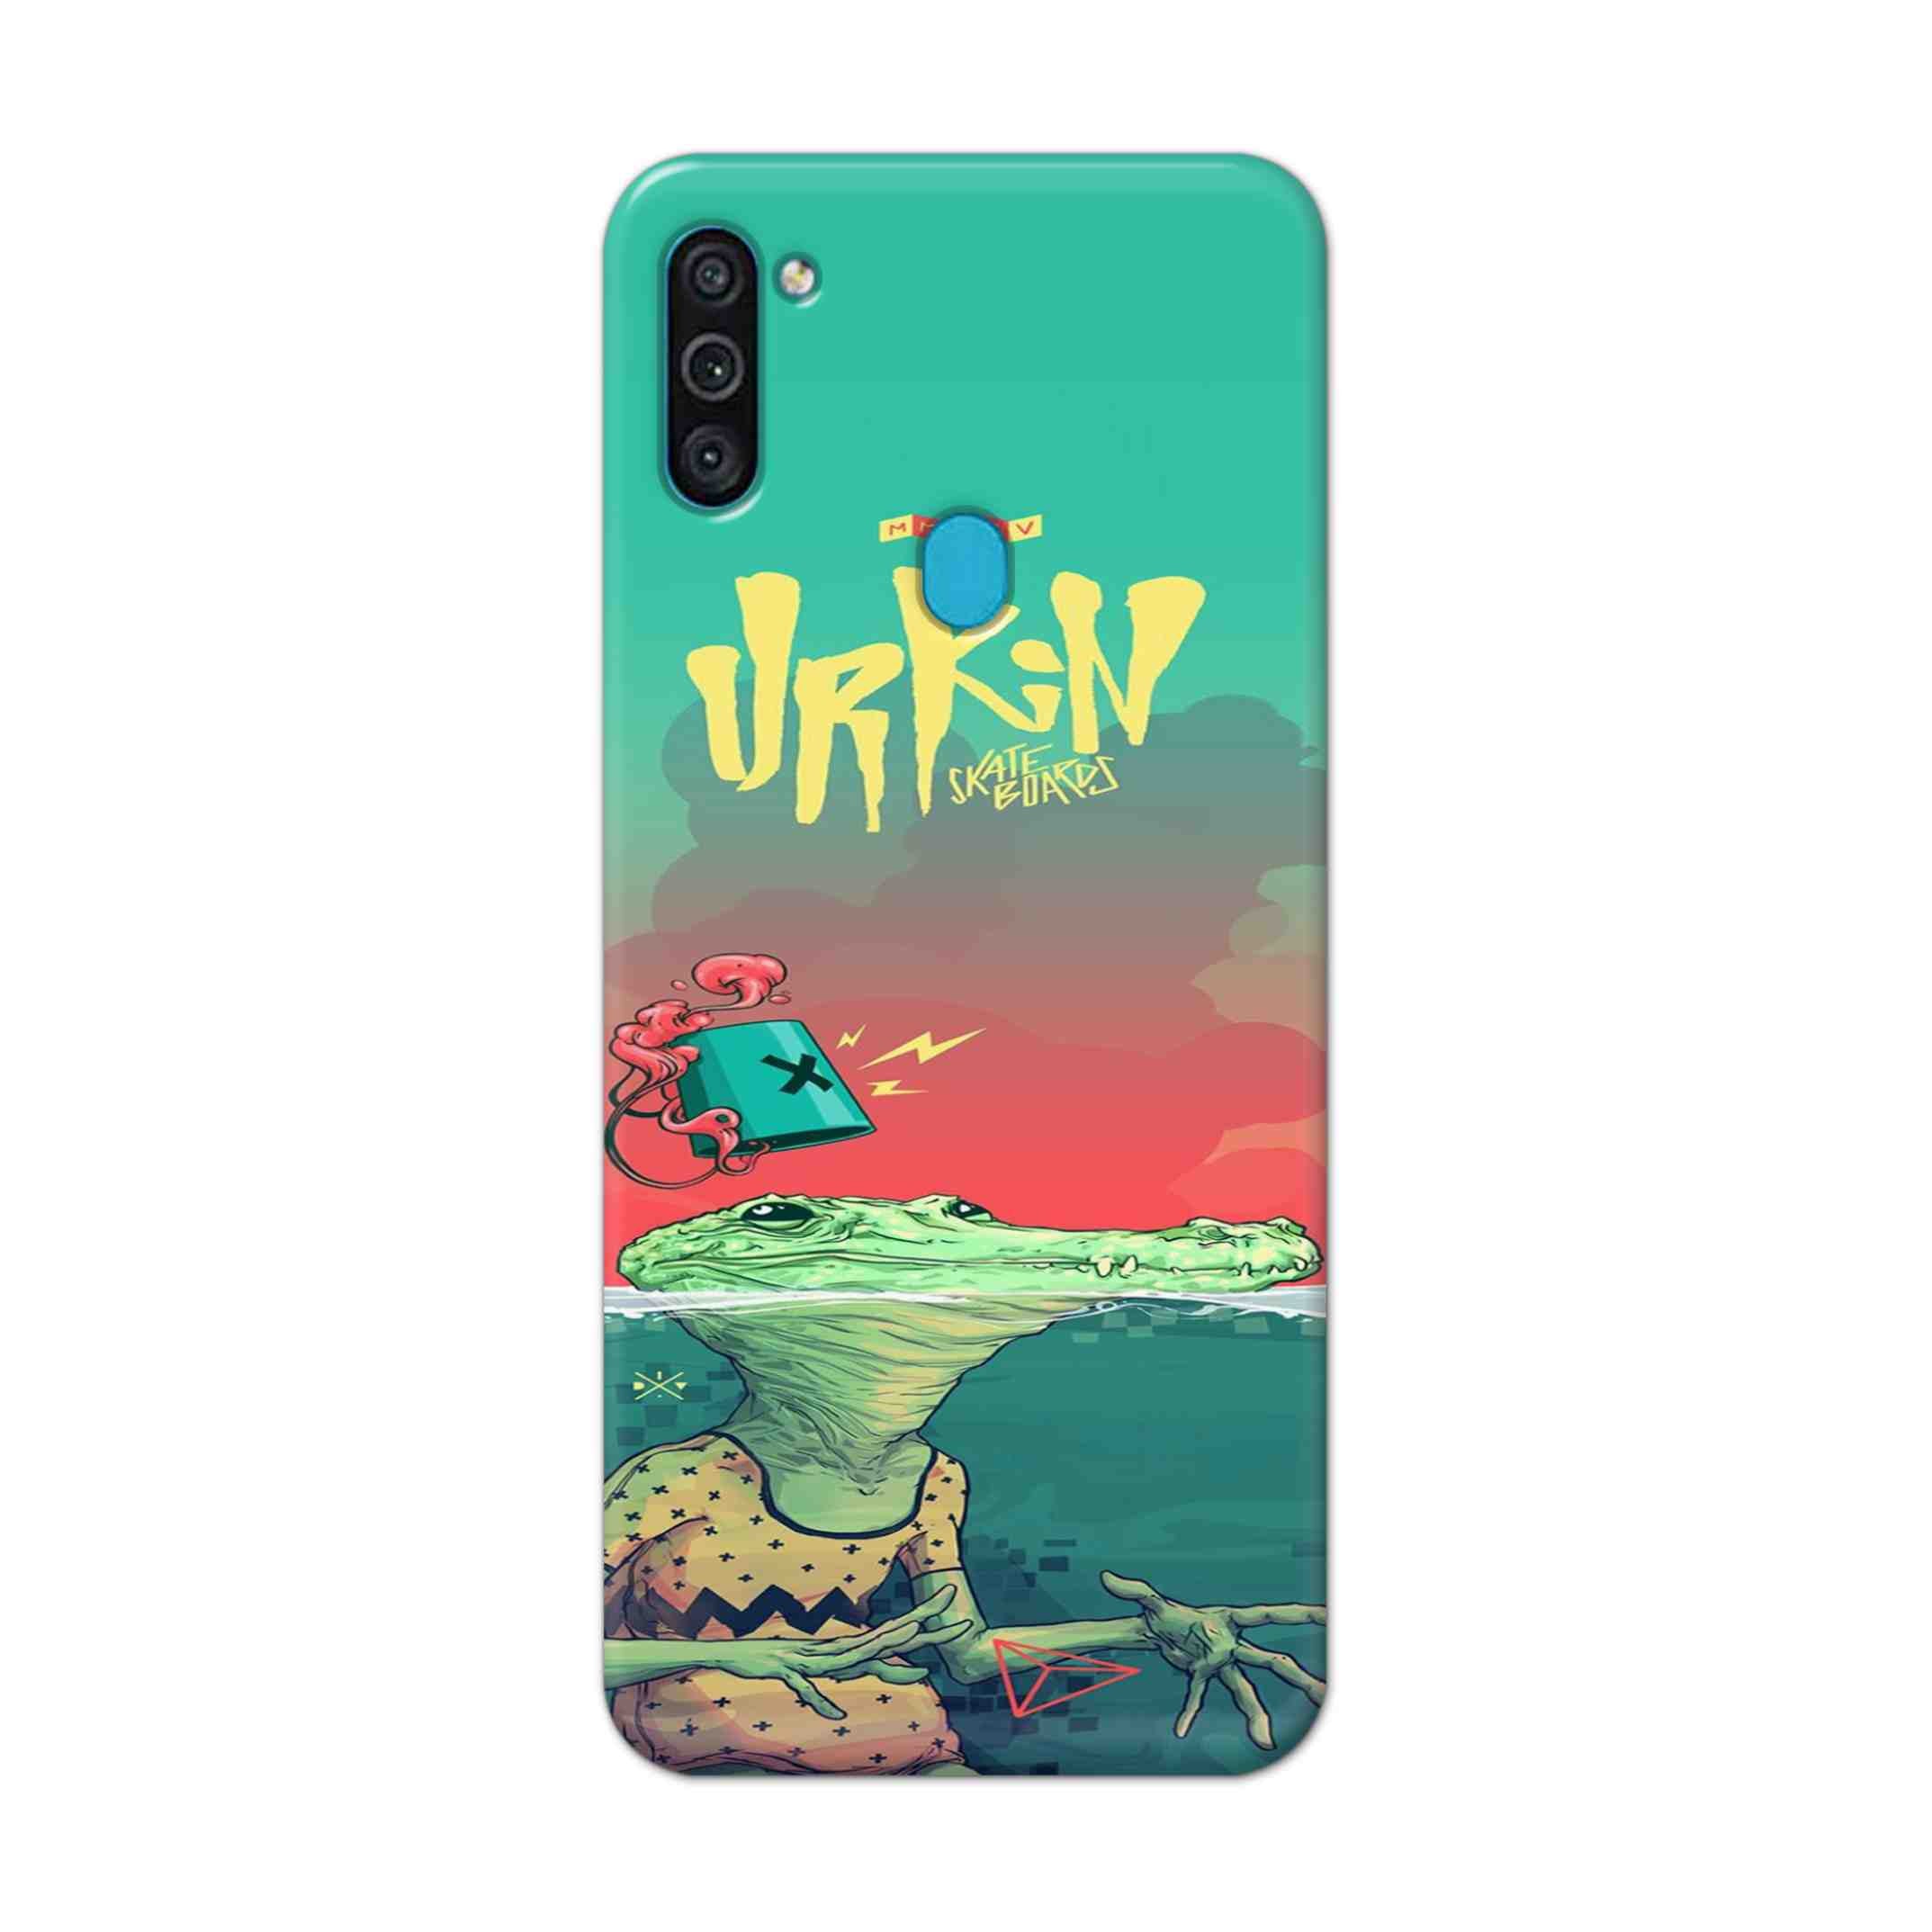 Buy Urkin Hard Back Mobile Phone Case Cover For Samsung Galaxy M11 Online